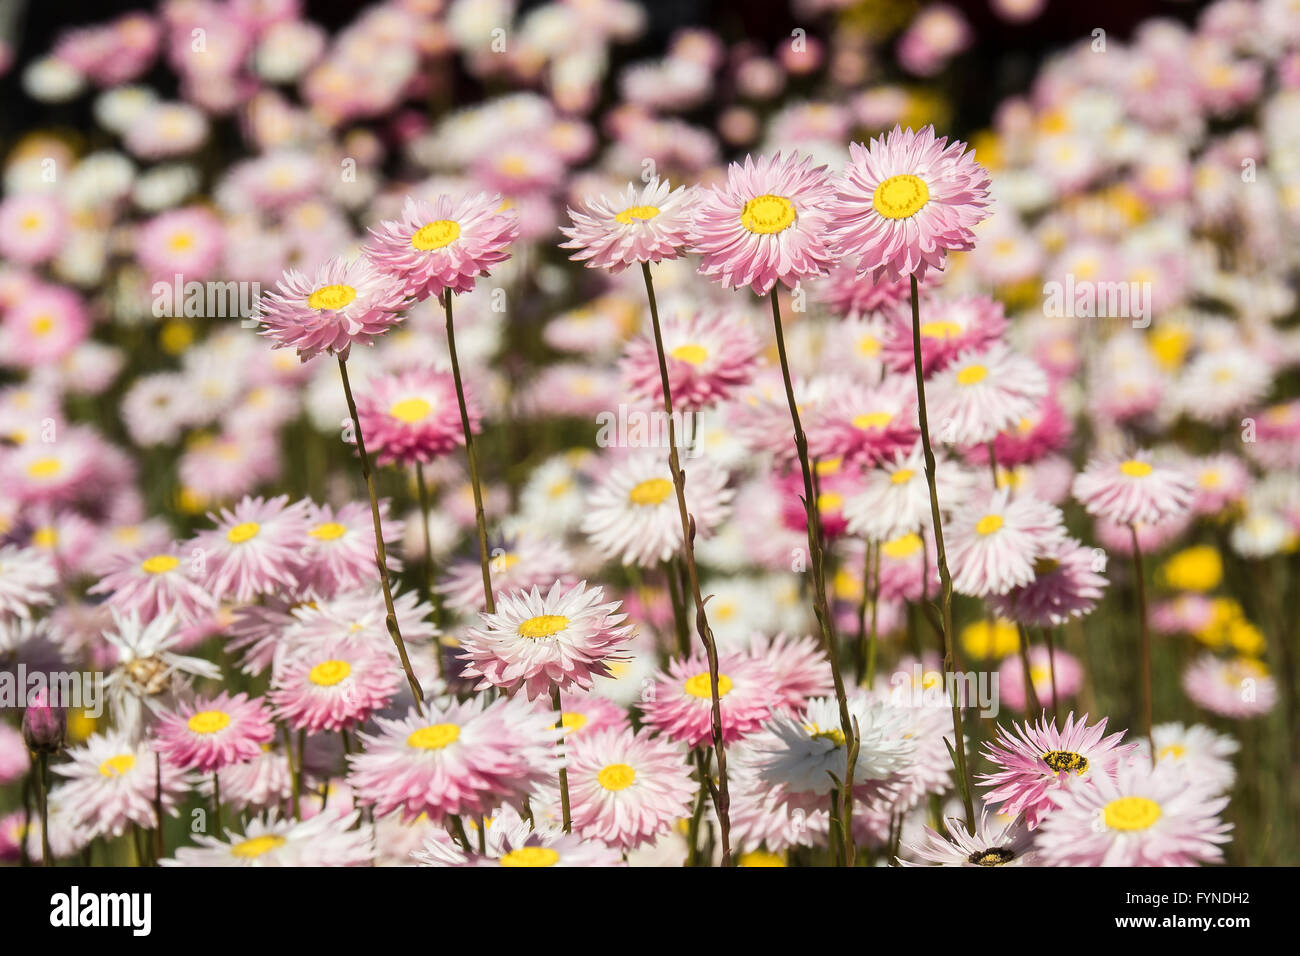 Paper Daisys, Pink Spring Flowers, Kings Park, The City of Perth, Western Australia Stock Photo